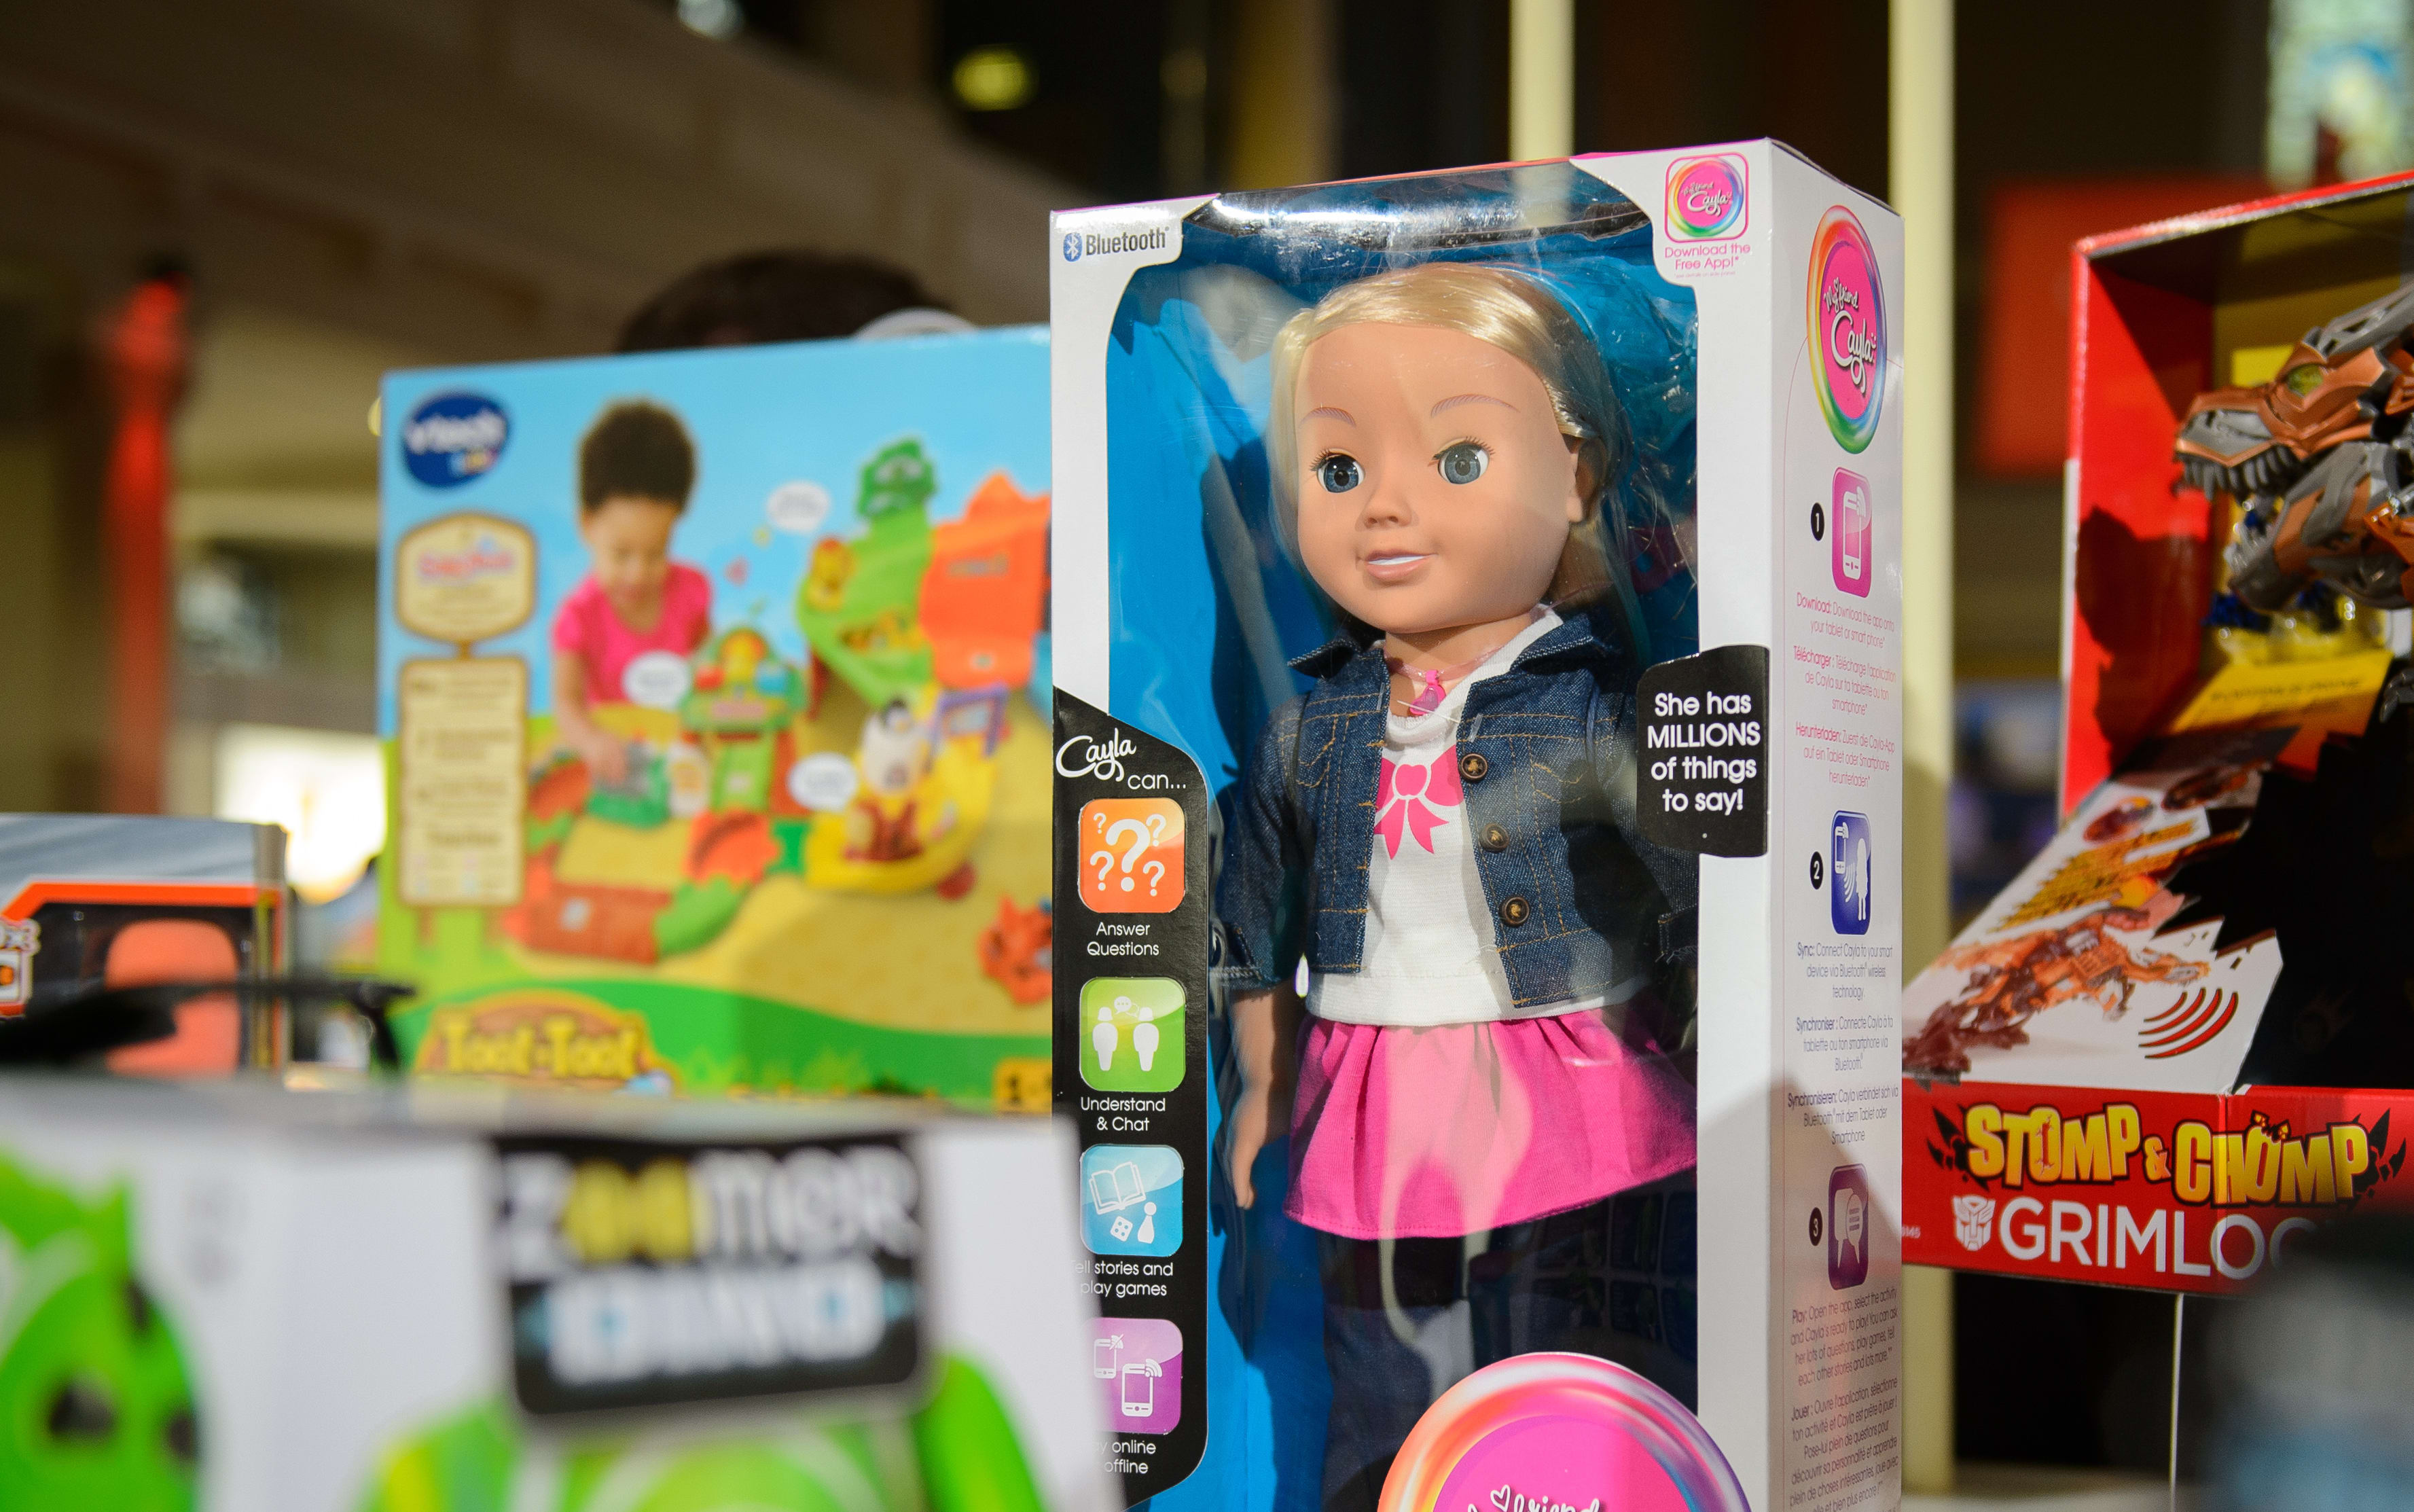 The talking doll -  pictured here at the DreamToys toy fair in central London -  has been banned by German authorities.